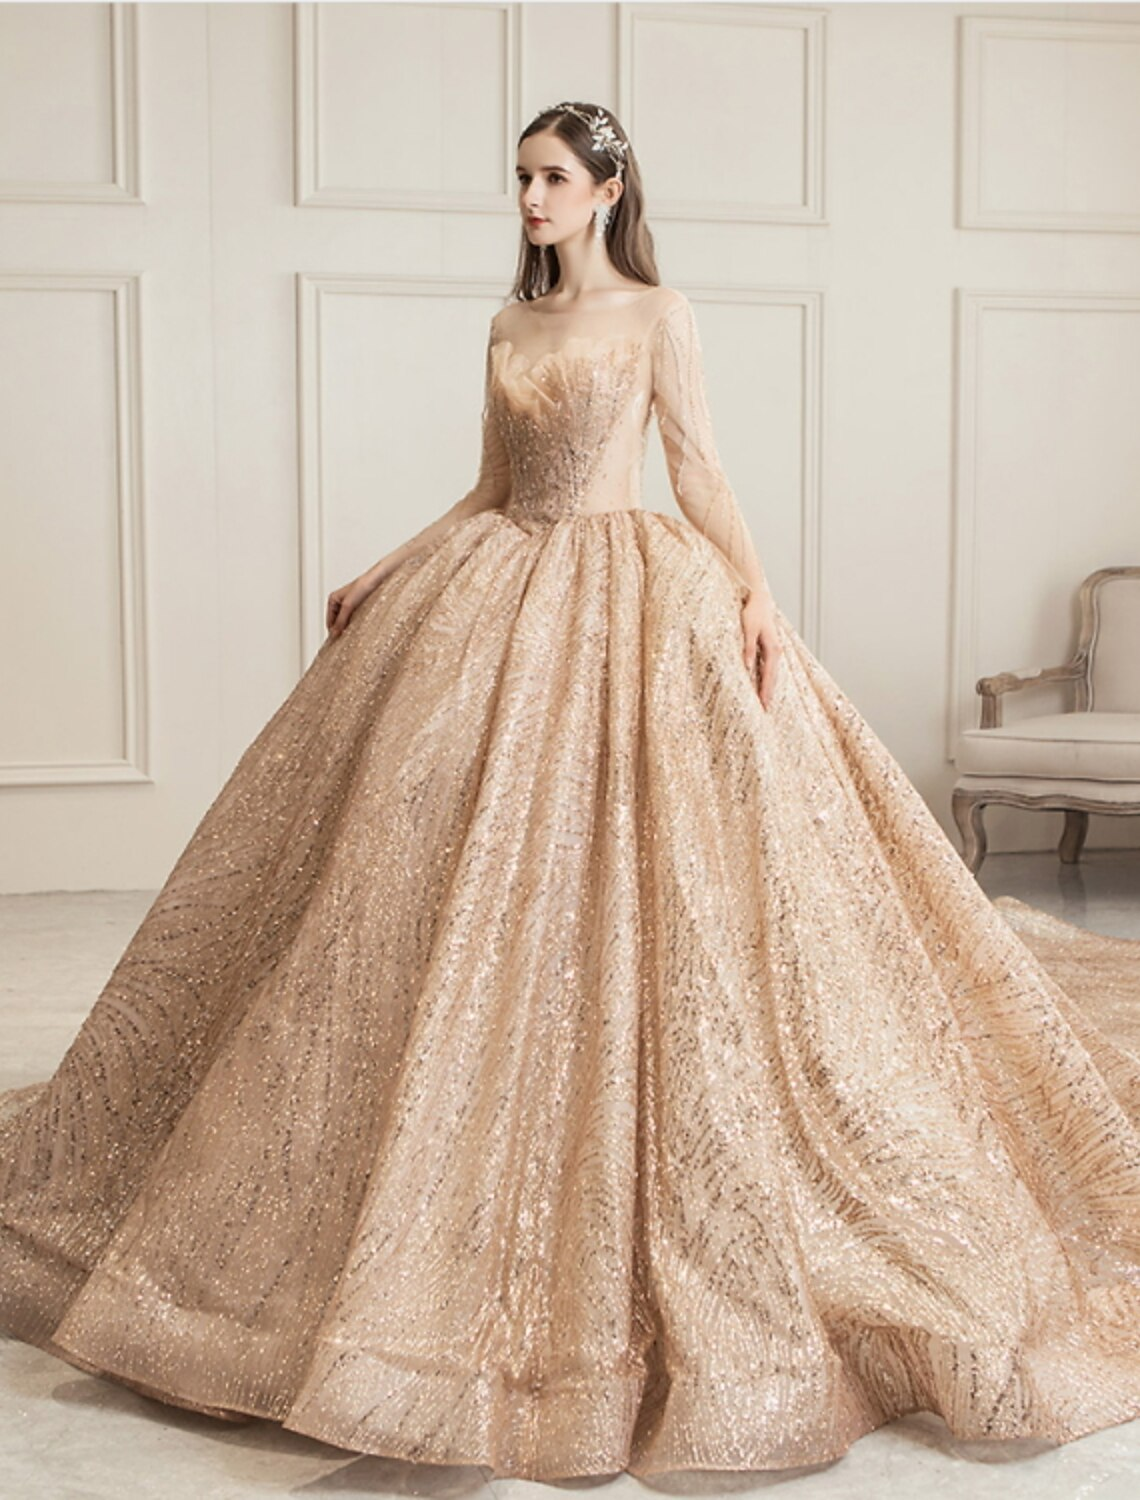 Engagement Wedding Dresses in Color Formal Wedding Dresses Chapel Train Princess Long Sleeve Jewel Neck Tulle With Ruched